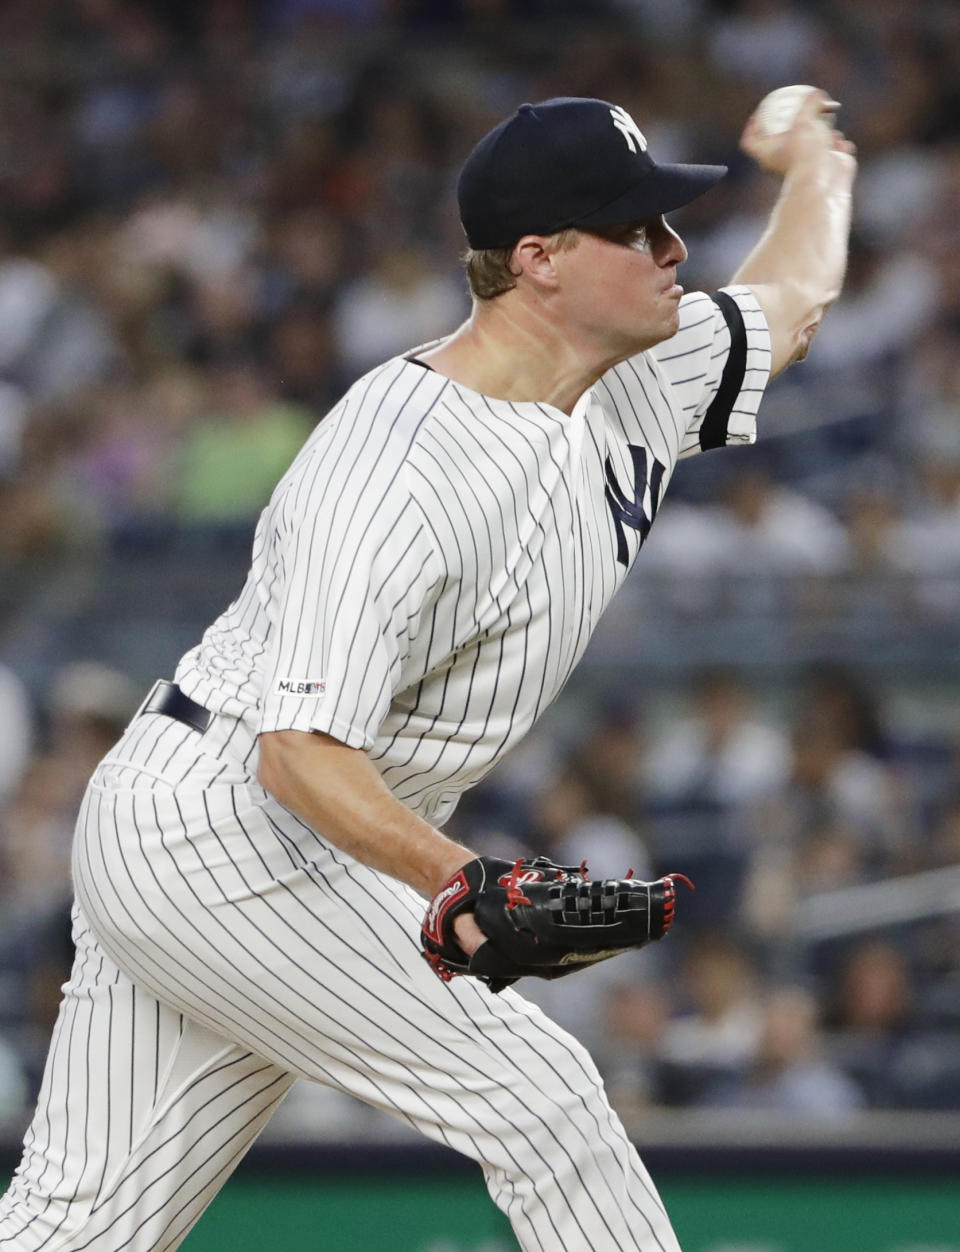 New York Yankees' Joe Mantiply delivers a pitch during the fourth inning of the second game of a baseball doubleheader against the Baltimore Orioles, Monday, Aug. 12, 2019, in New York. (AP Photo/Frank Franklin II)